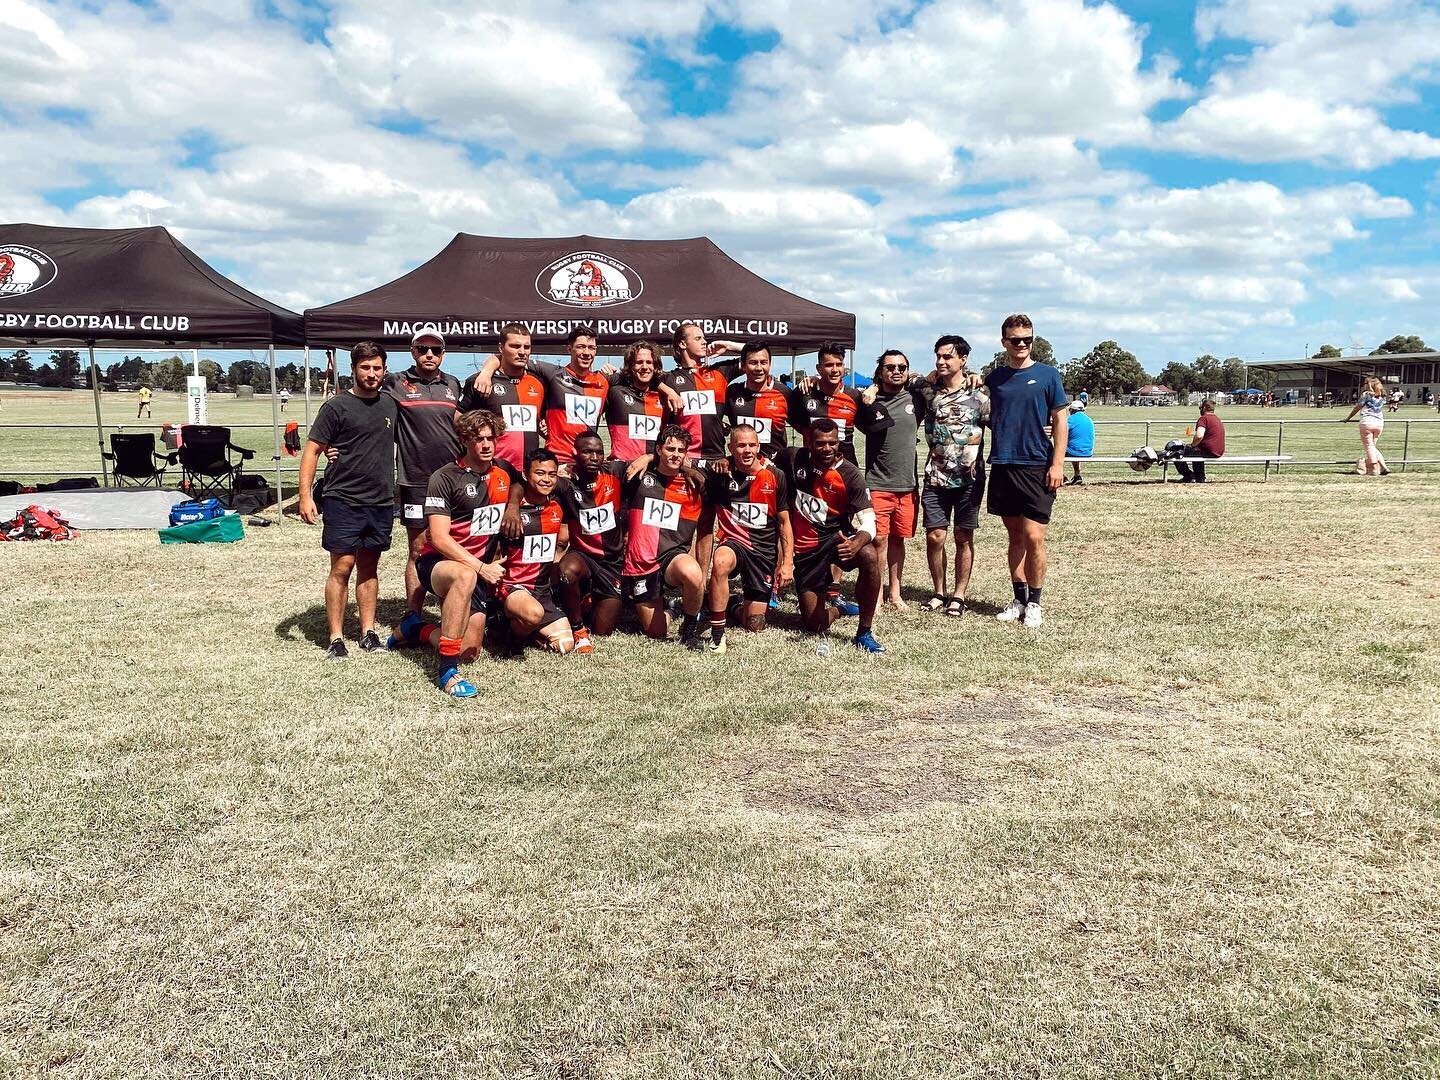 Subbies 7s was an awesome day of footy. We had left the day with a win and 3 losses. Overall the boys played footy, had fun and got pumped for our season ahead! also a big thank you too all of our supporters yesterday ❤️🖤